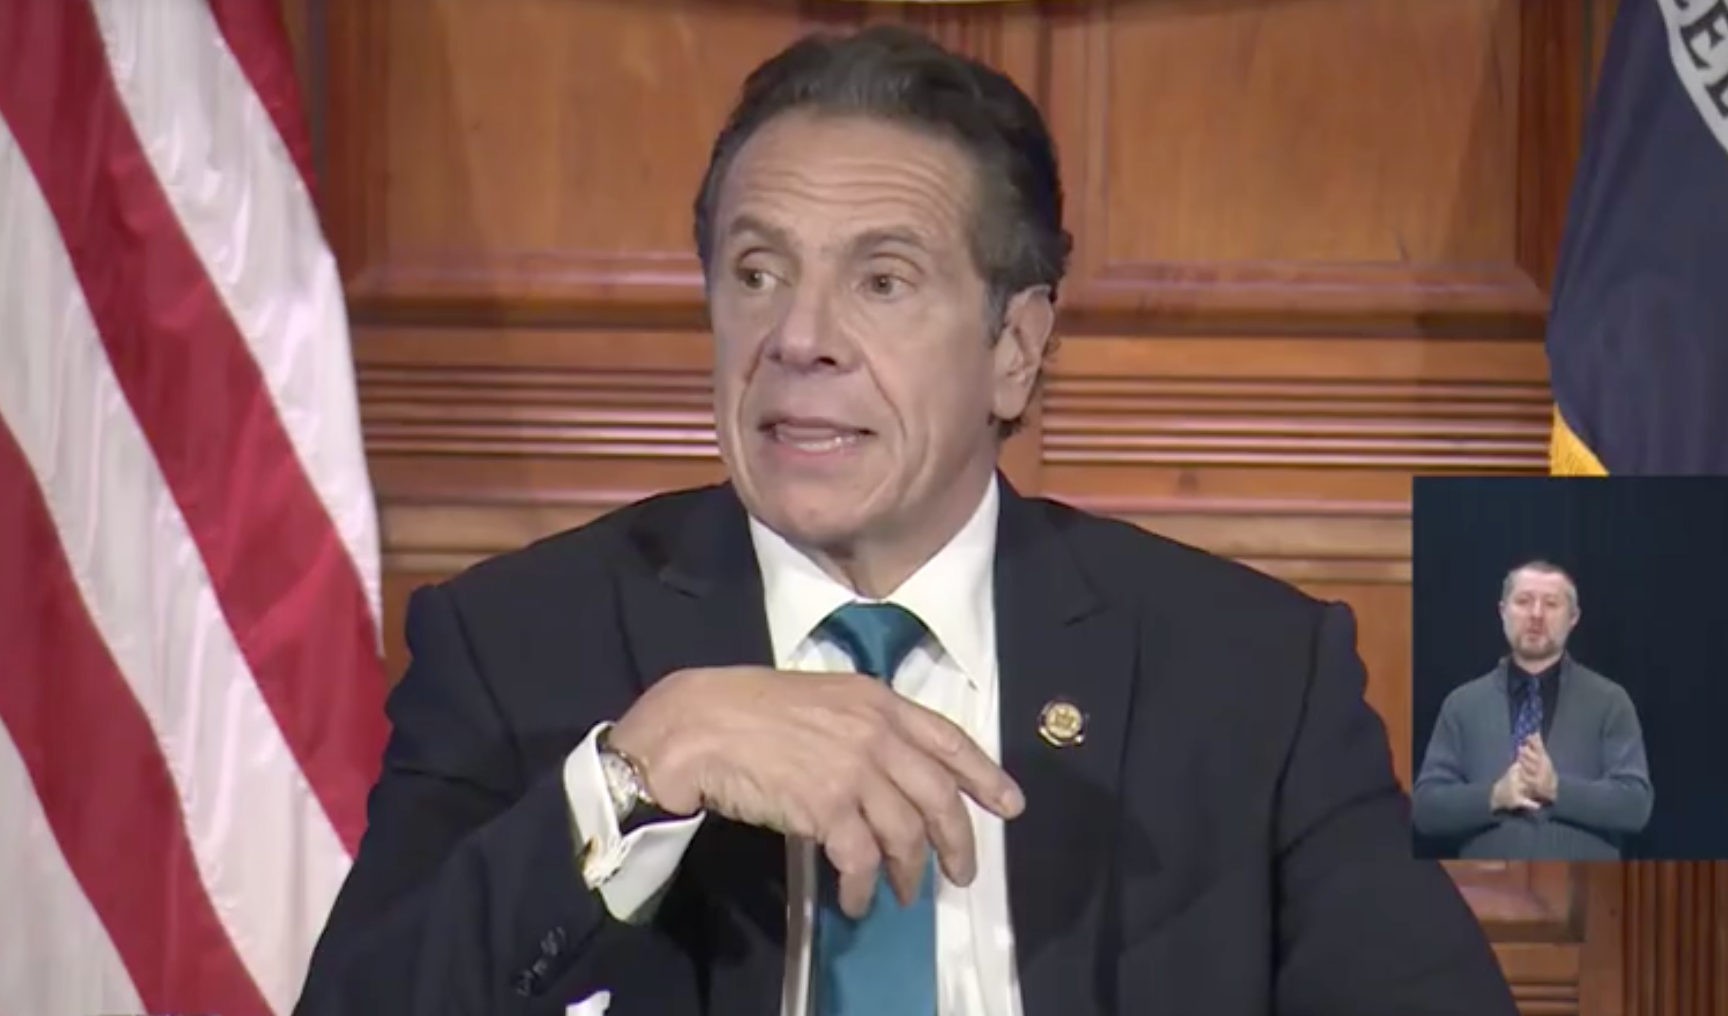 Andrew Cuomo, the governor of New York, said indoor dining may well end next week in New York City